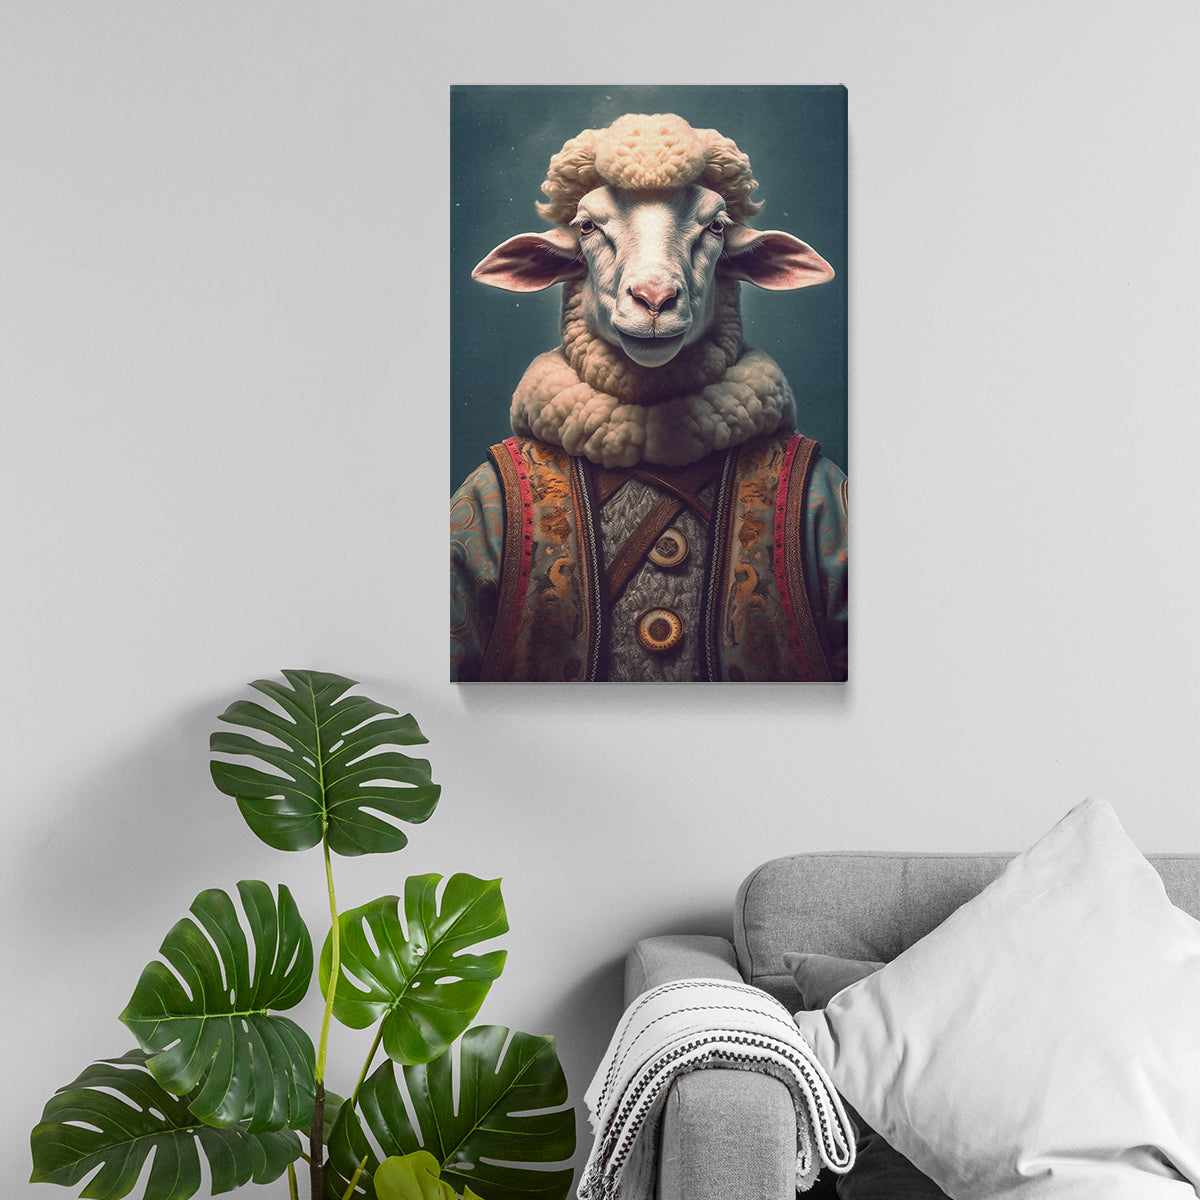 Sheep in Traditional Attire Canvas Prints Artesty 1 Panel 16"x24" 